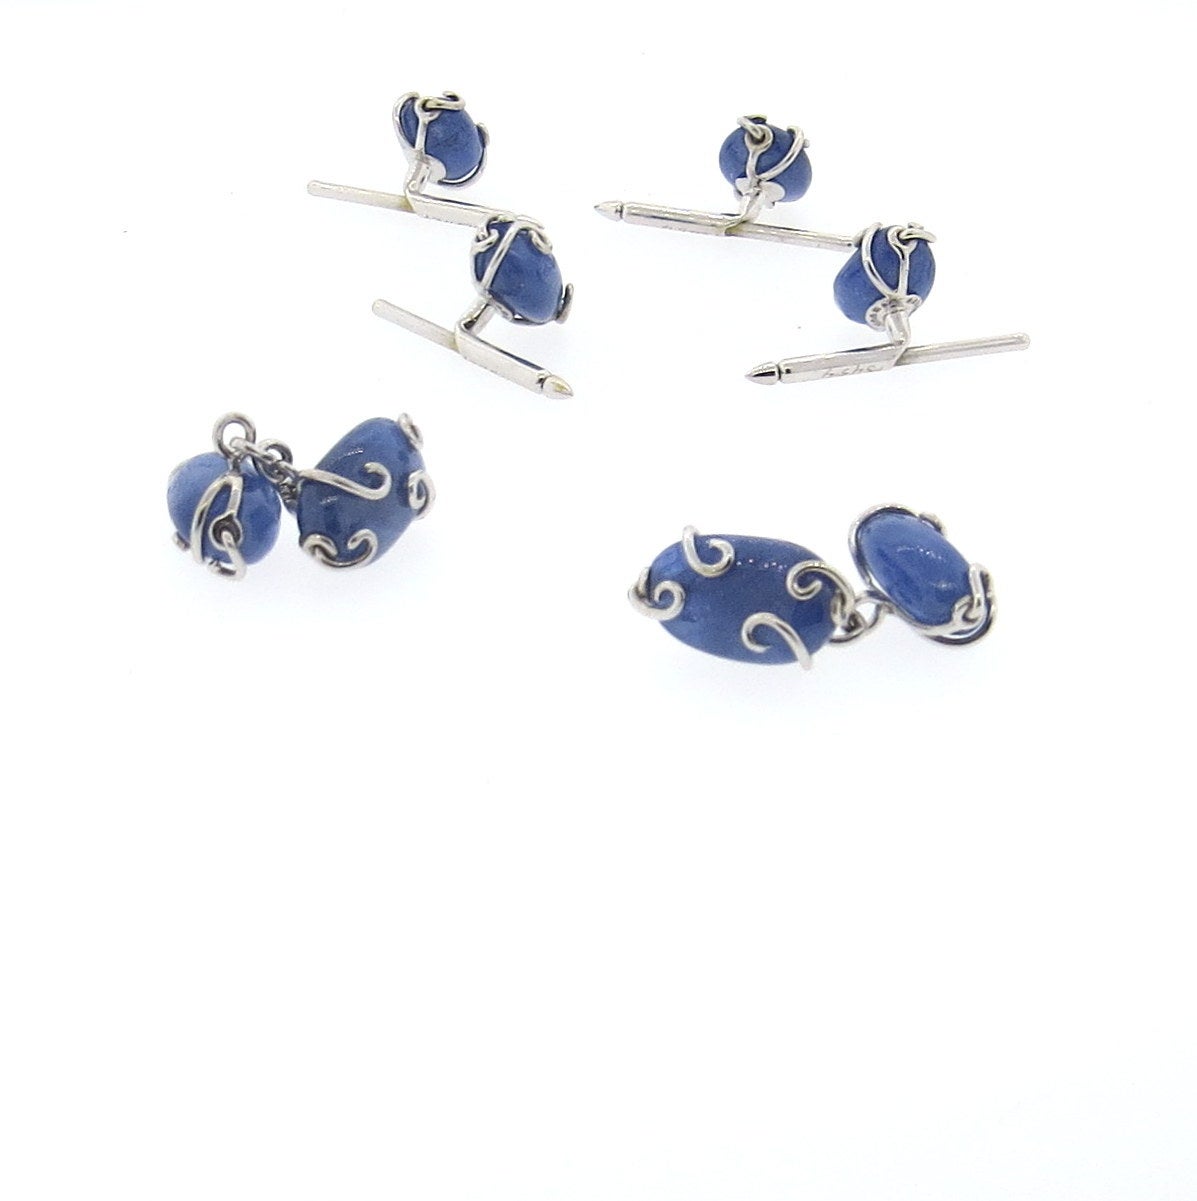 18k white gold cufflinks and studs set with sapphires.  The cufflinks measure 16.5mm x 9.5mm and the studs measure 13mm x 9mm.  The weight of the set 24.2 grams,